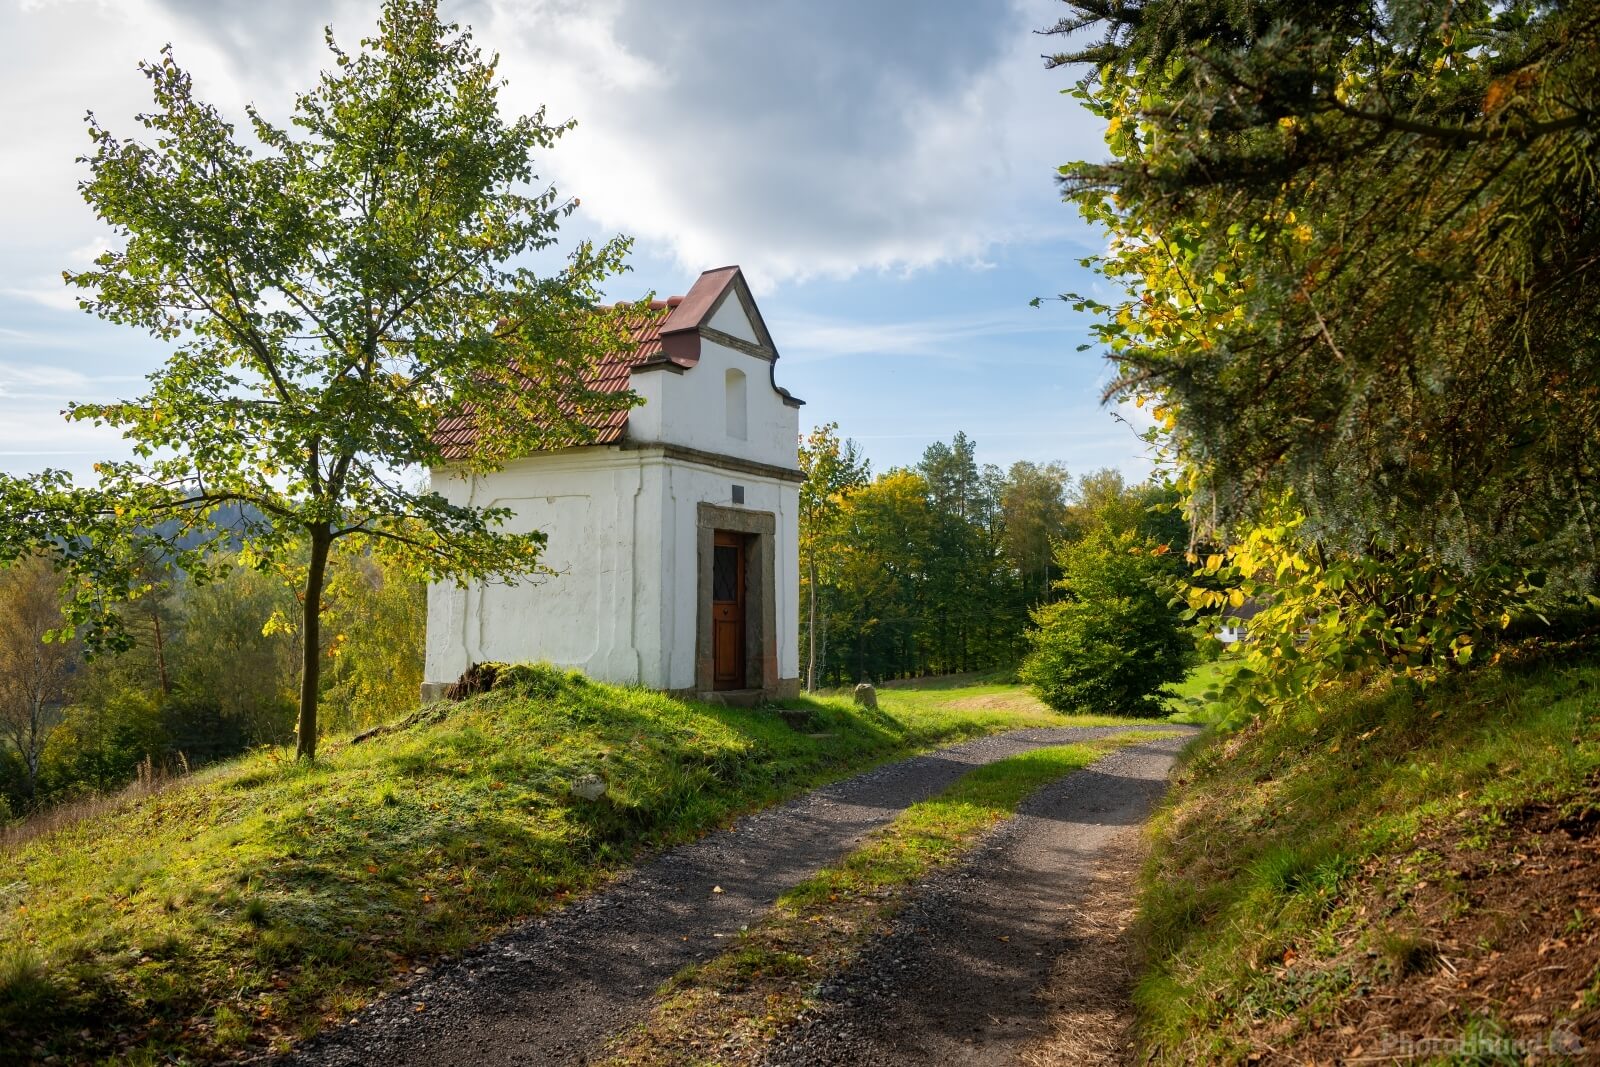 Image of Alcove chapel above Všemily by VOJTa Herout